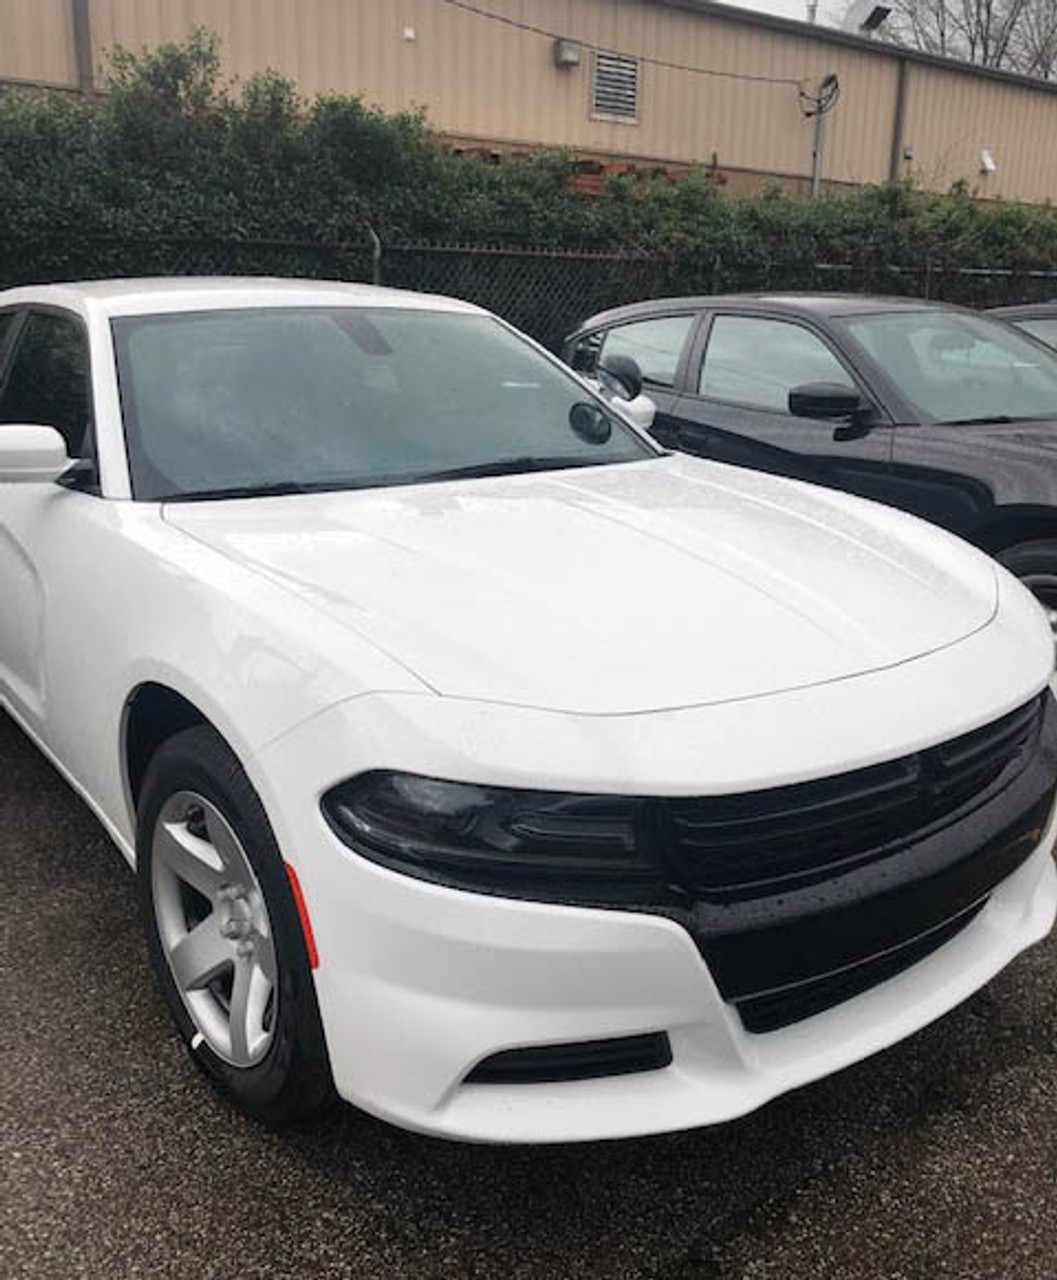 New 2023 White Dodge Charger PPV V8 RWD ready to be built as an Unmarked Patrol Package Police Pursuit Car (Emergency Lighting, Siren, Controller,  Console, etc.), WCU3, + Delivery